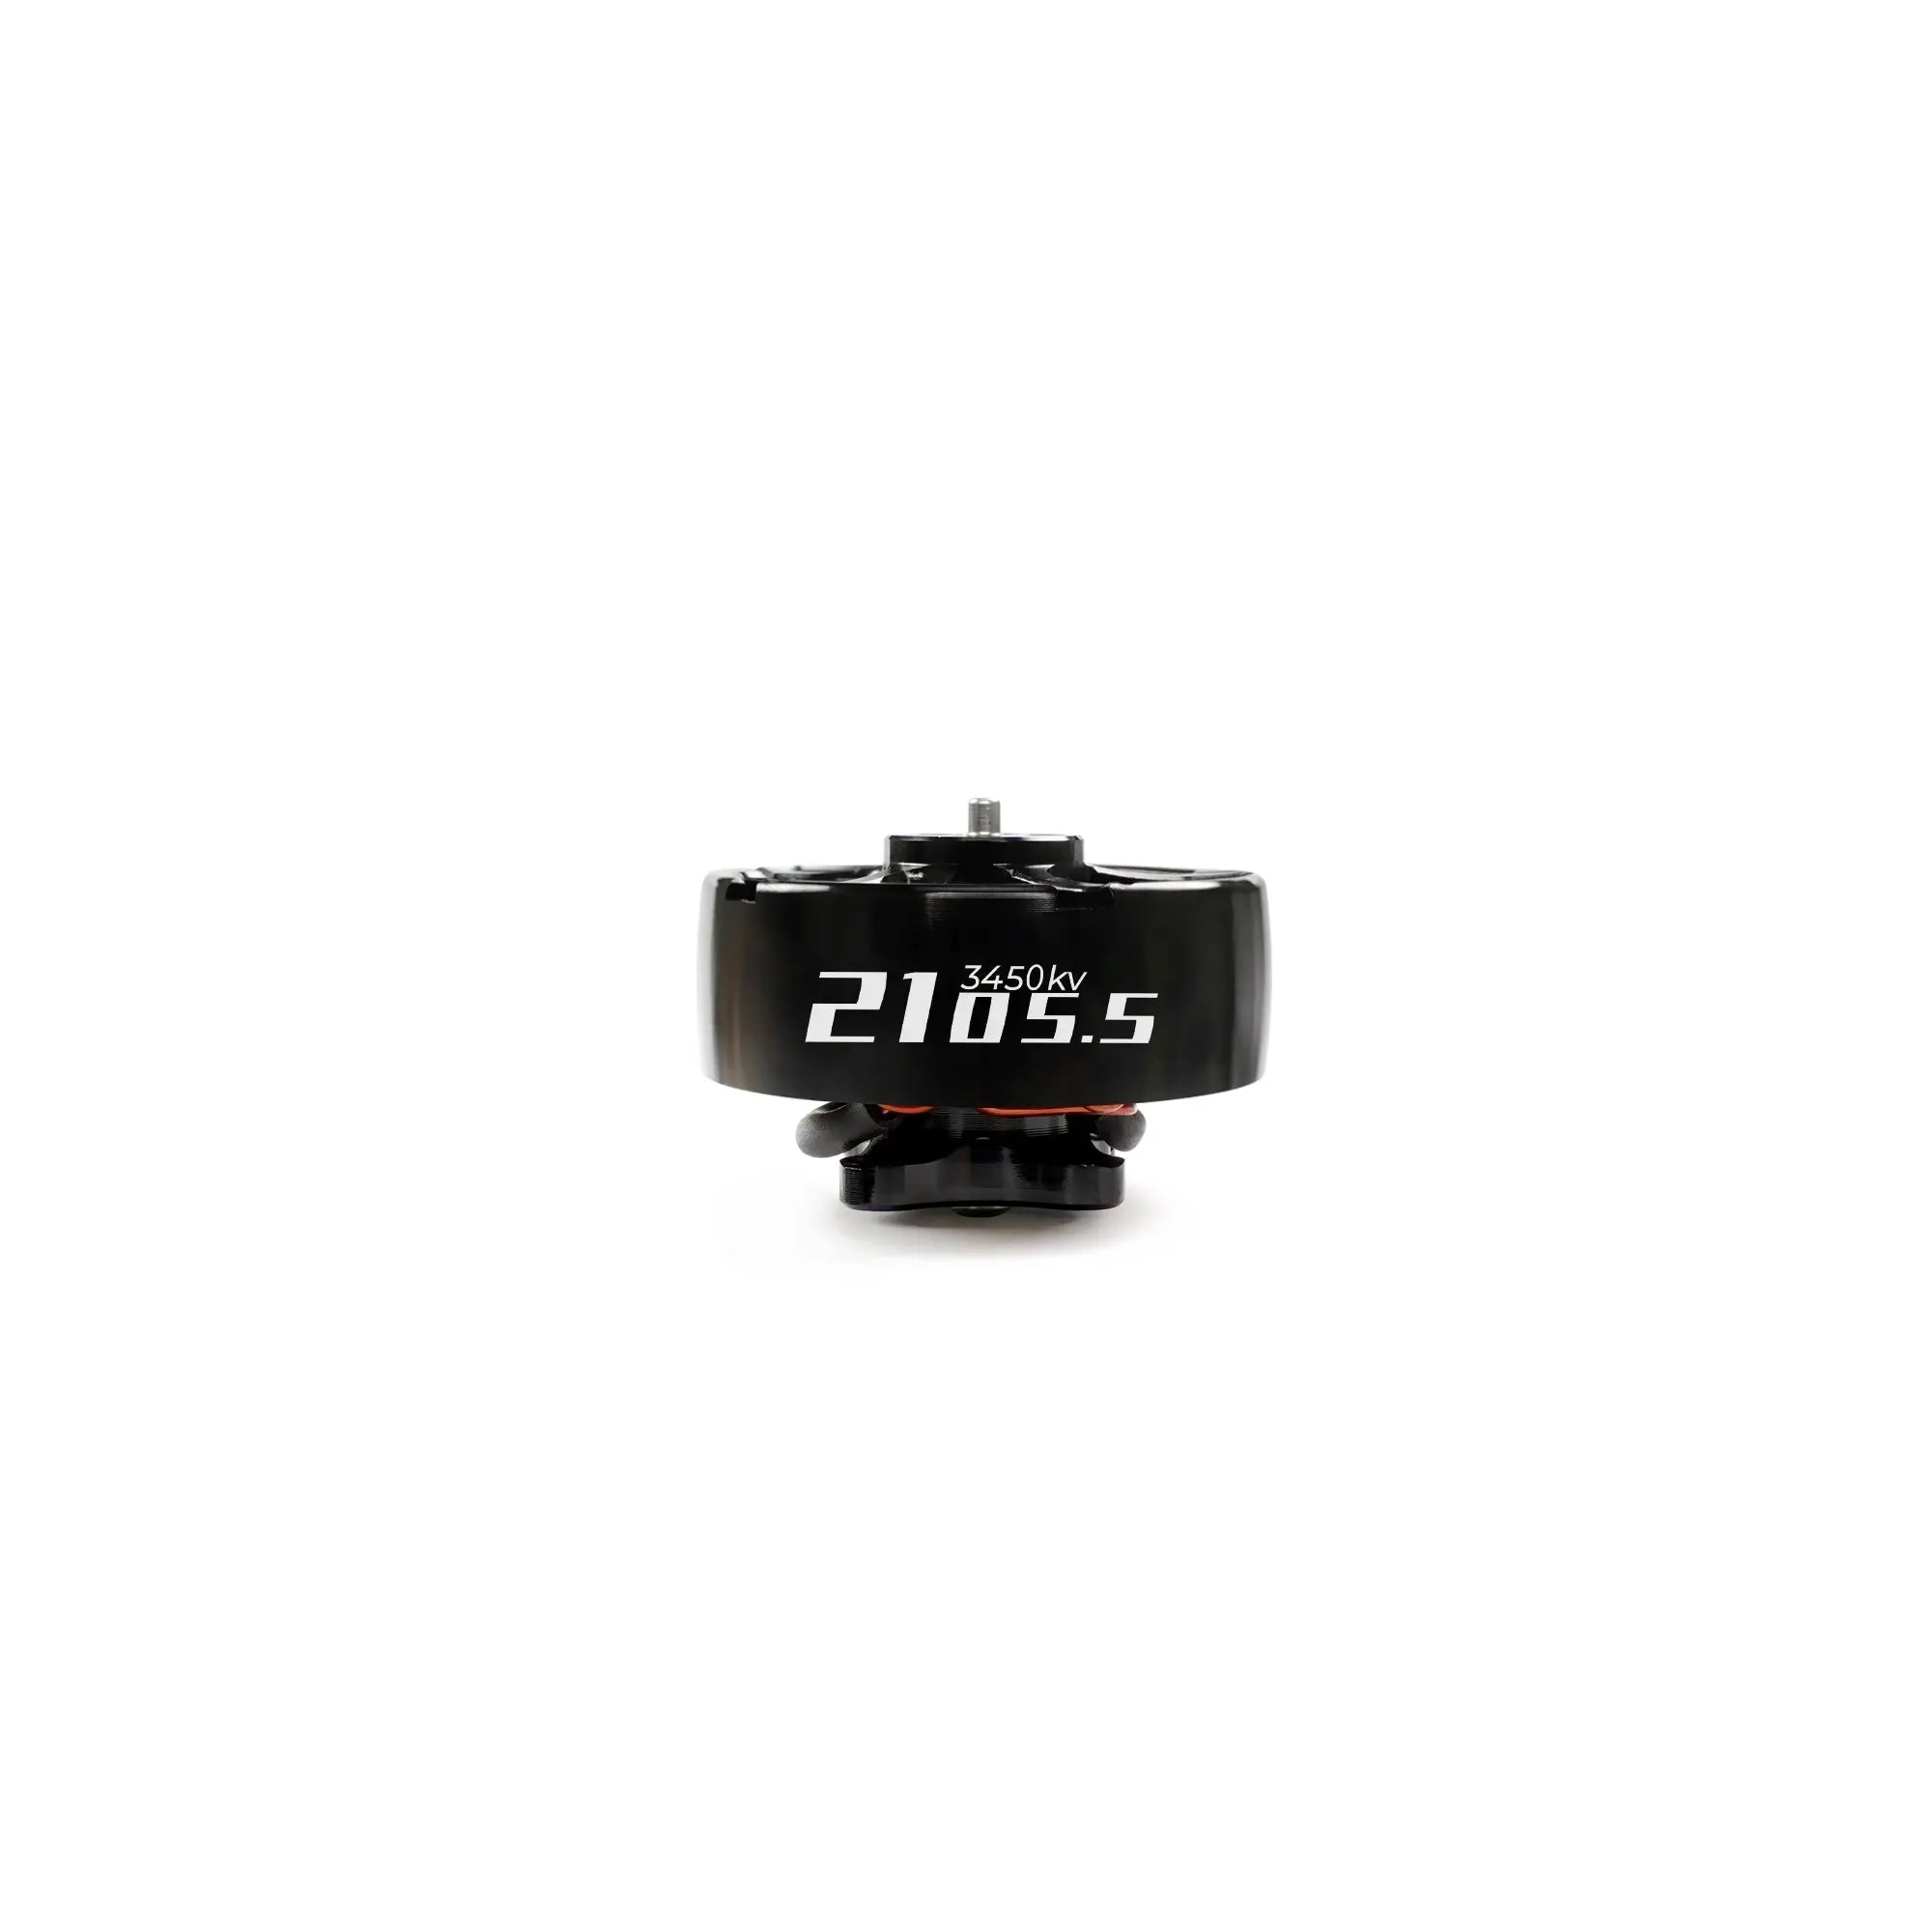 GEPRC SPEEDX2 0803 Brushless Motor, "Hollow out" design in the top of the rotor can be used in